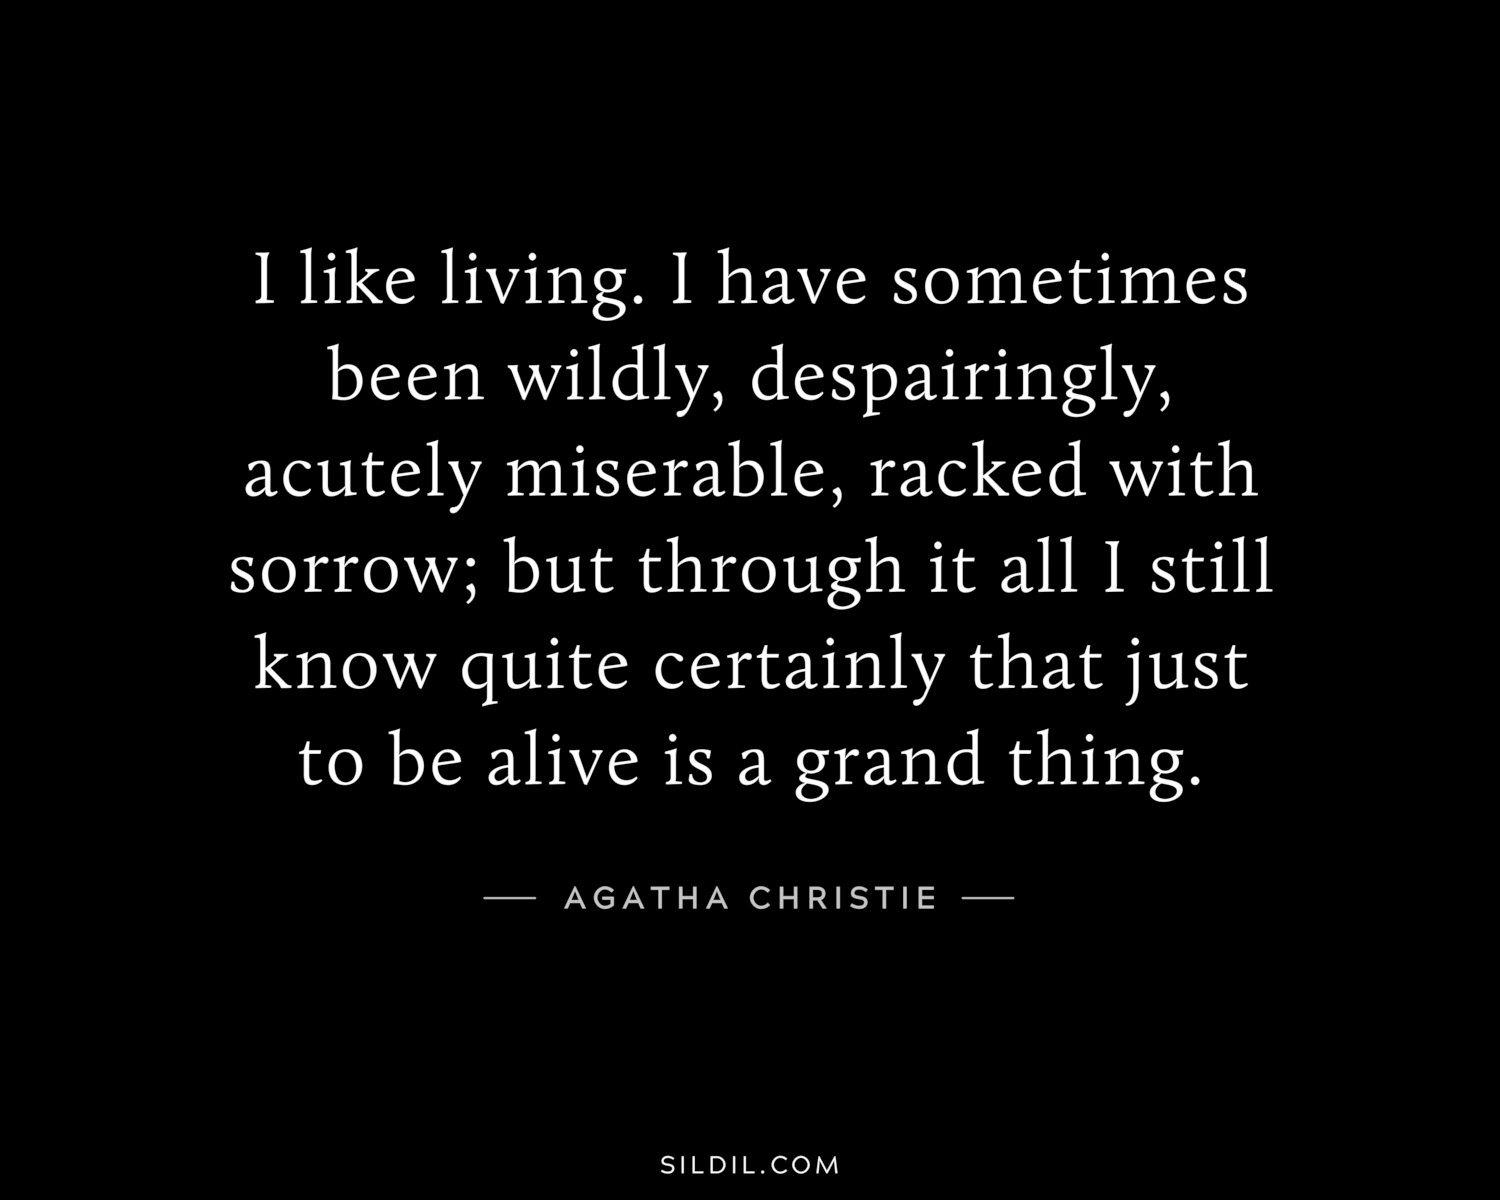 I like living. I have sometimes been wildly, despairingly, acutely miserable, racked with sorrow; but through it all I still know quite certainly that just to be alive is a grand thing.